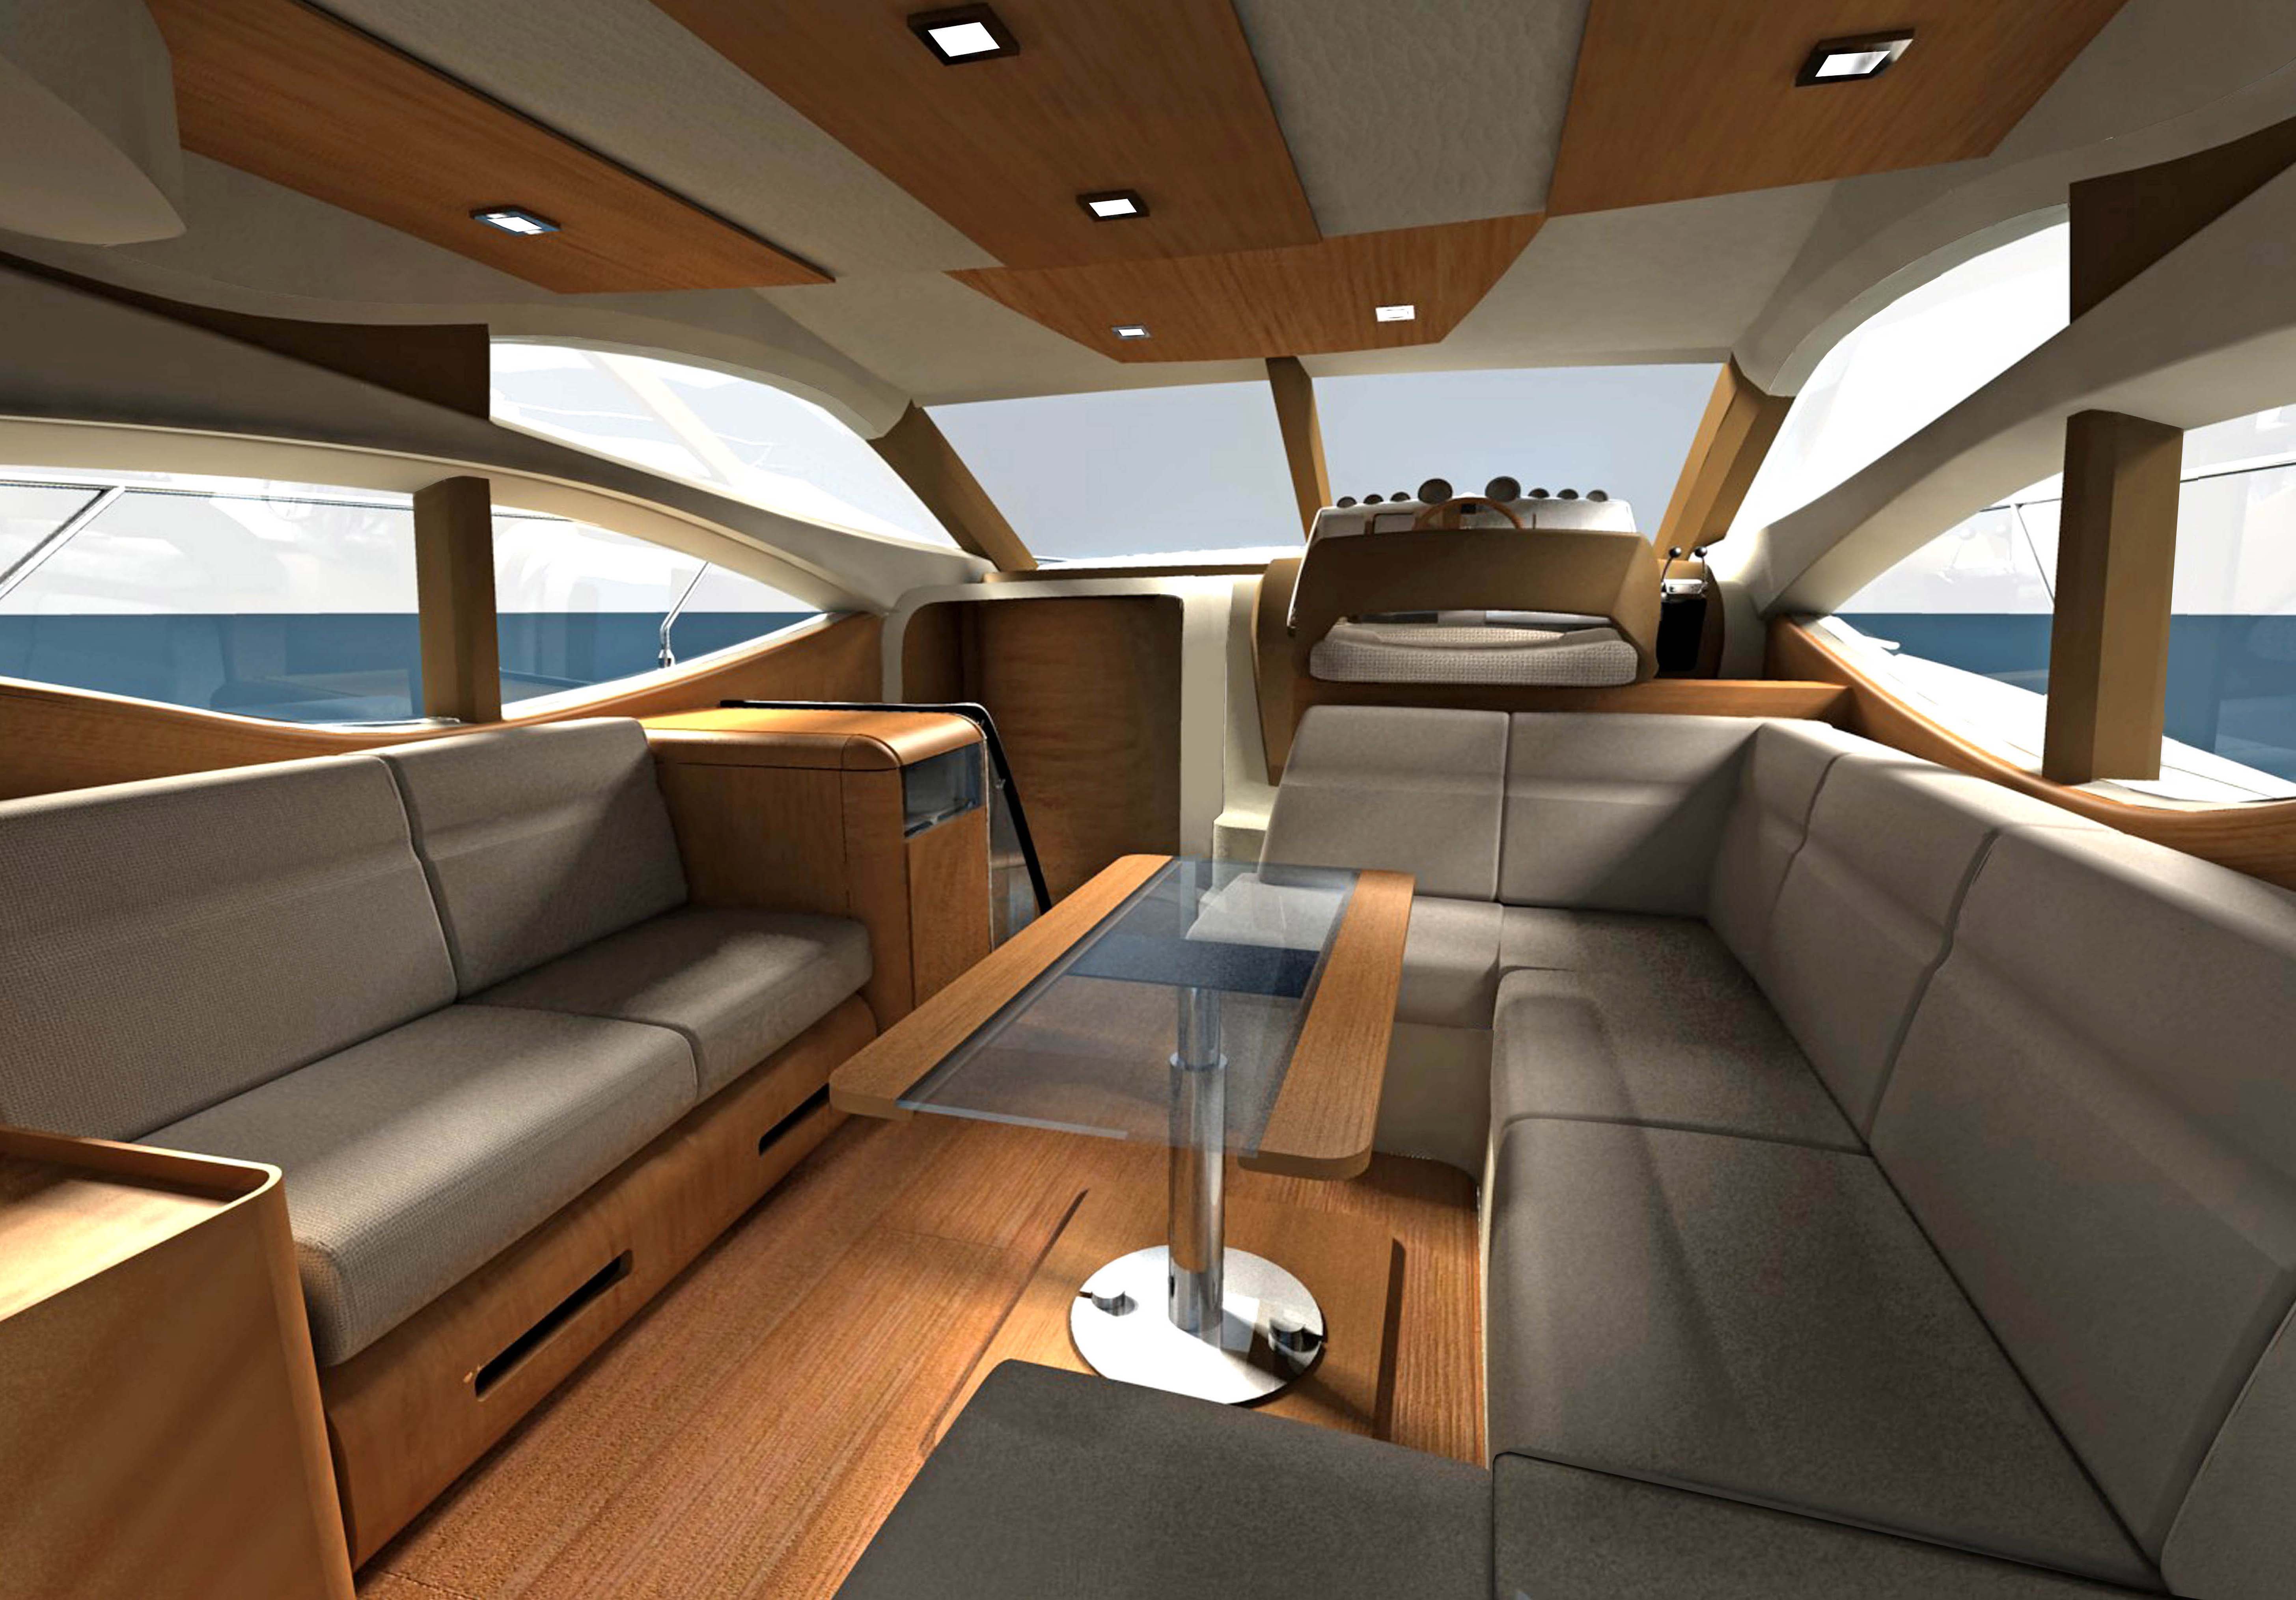 Boat Interior Design R54 About Remodel Amazing Design Ideas with ...